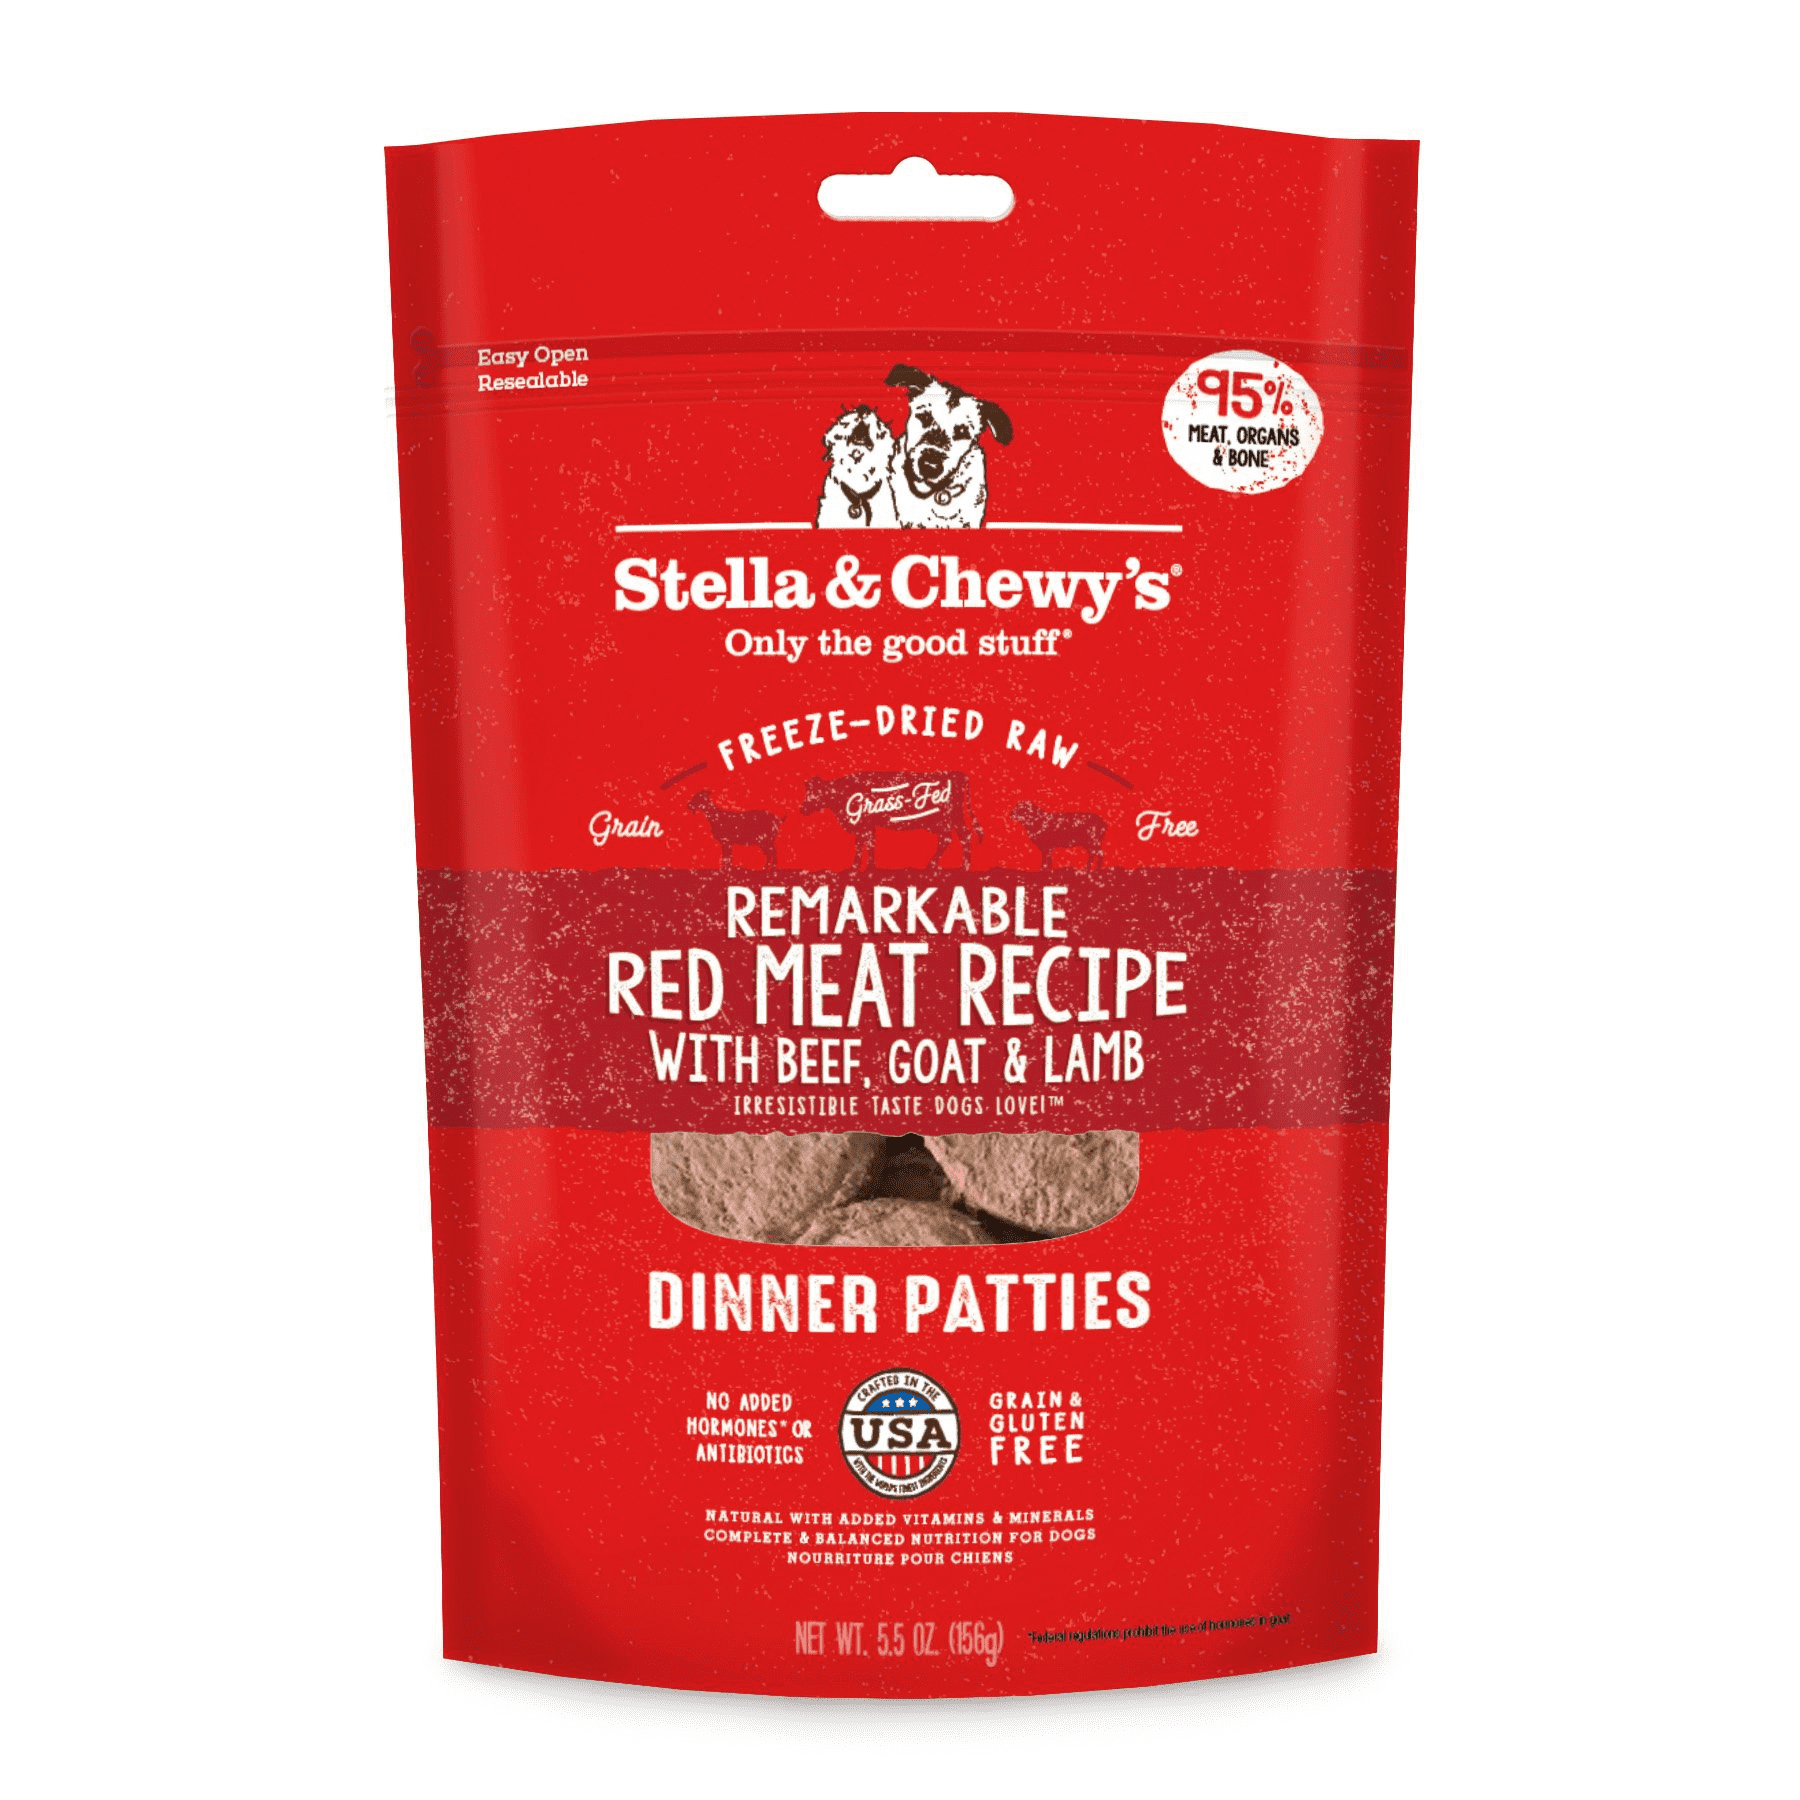 Freeze-Dried Red Meat Dinner Patties Dog Food by Stella & Chewy's